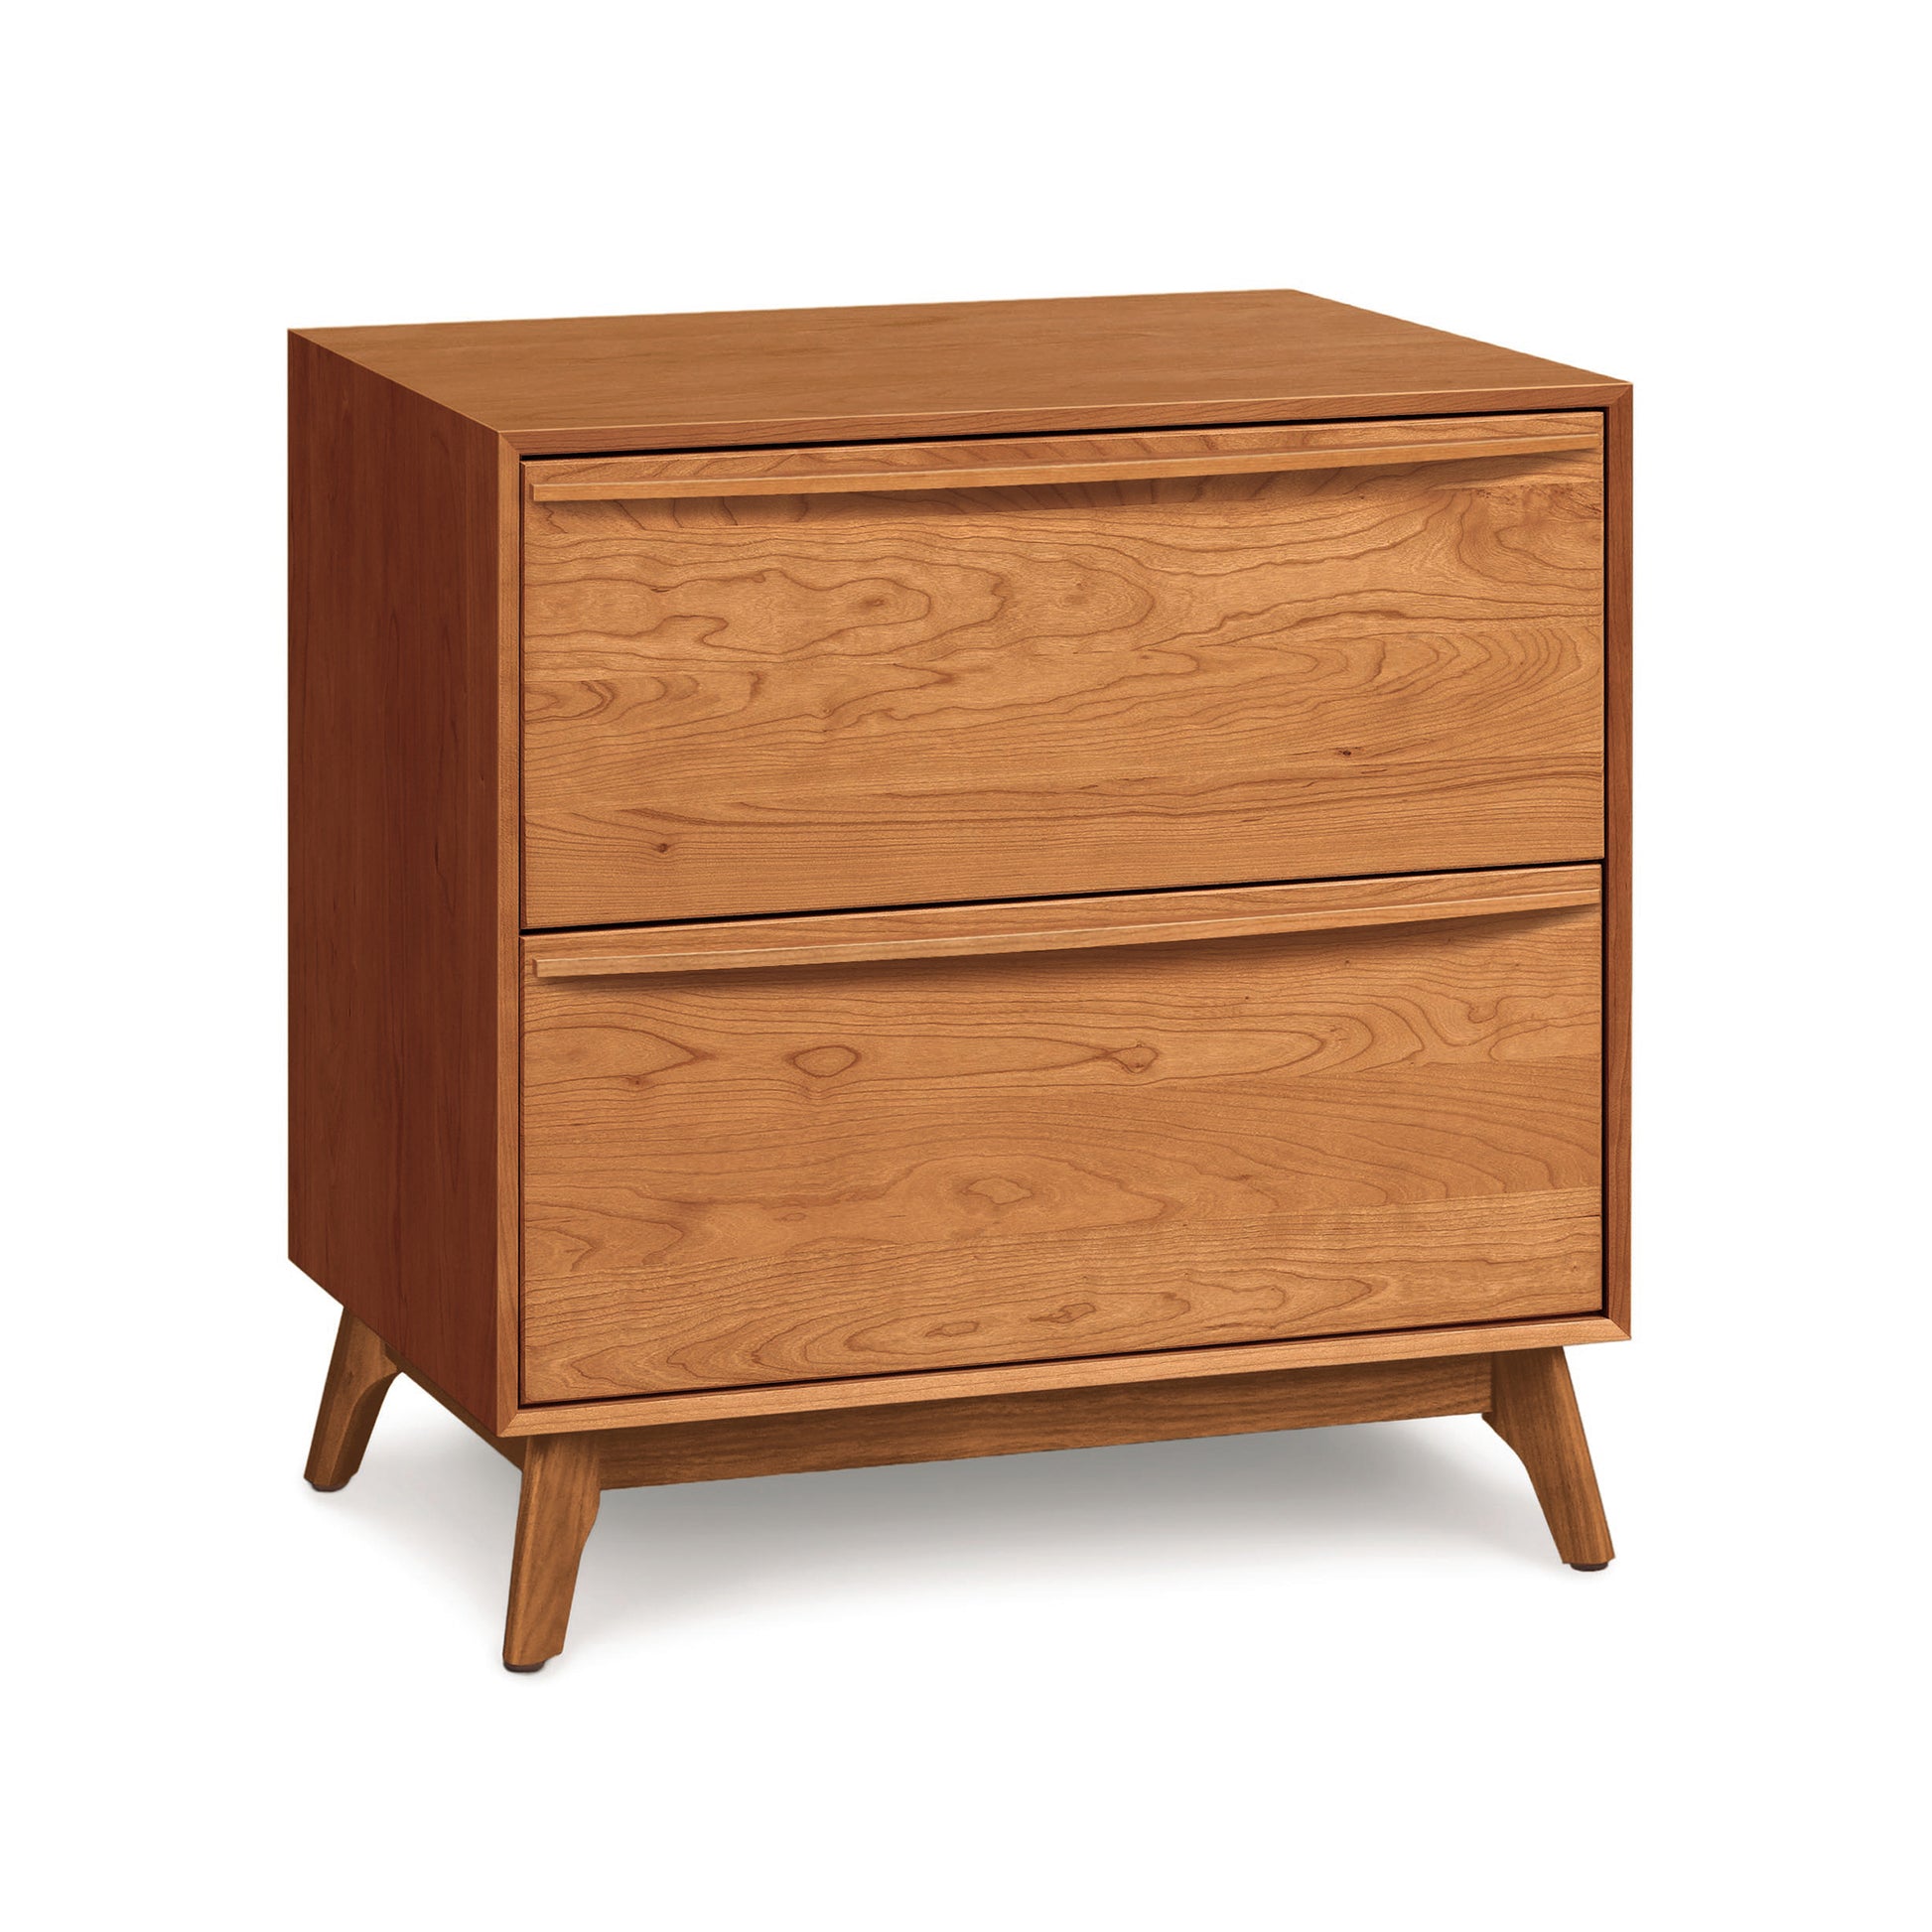 The Copeland Furniture Catalina 2-Drawer Nightstand is a contemporary style wooden nightstand, handmade in Bradford.